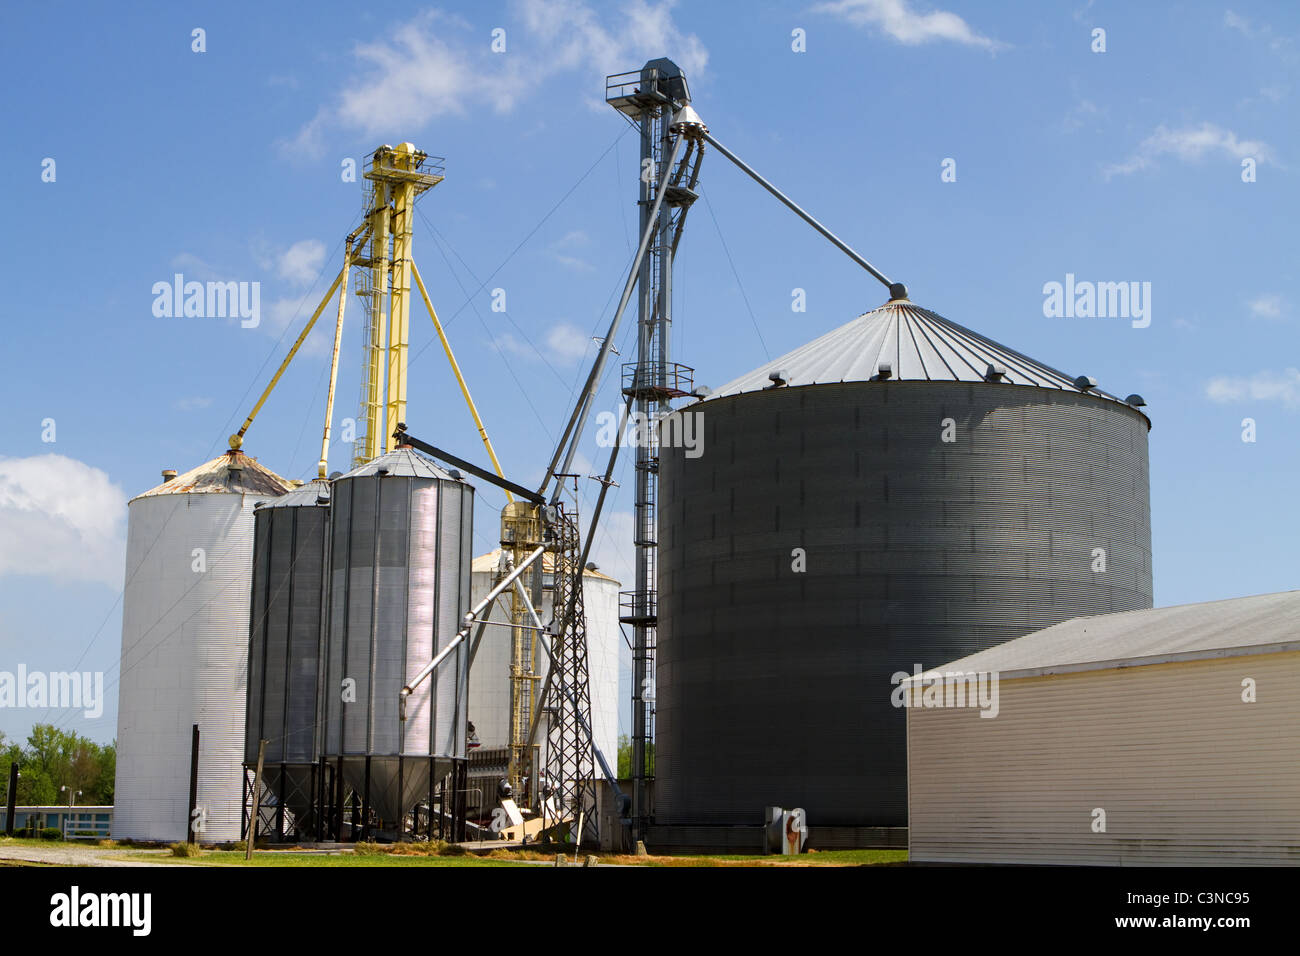 Grain storage elevators and silos for storing harvested crops against a blue sky. Stock Photo